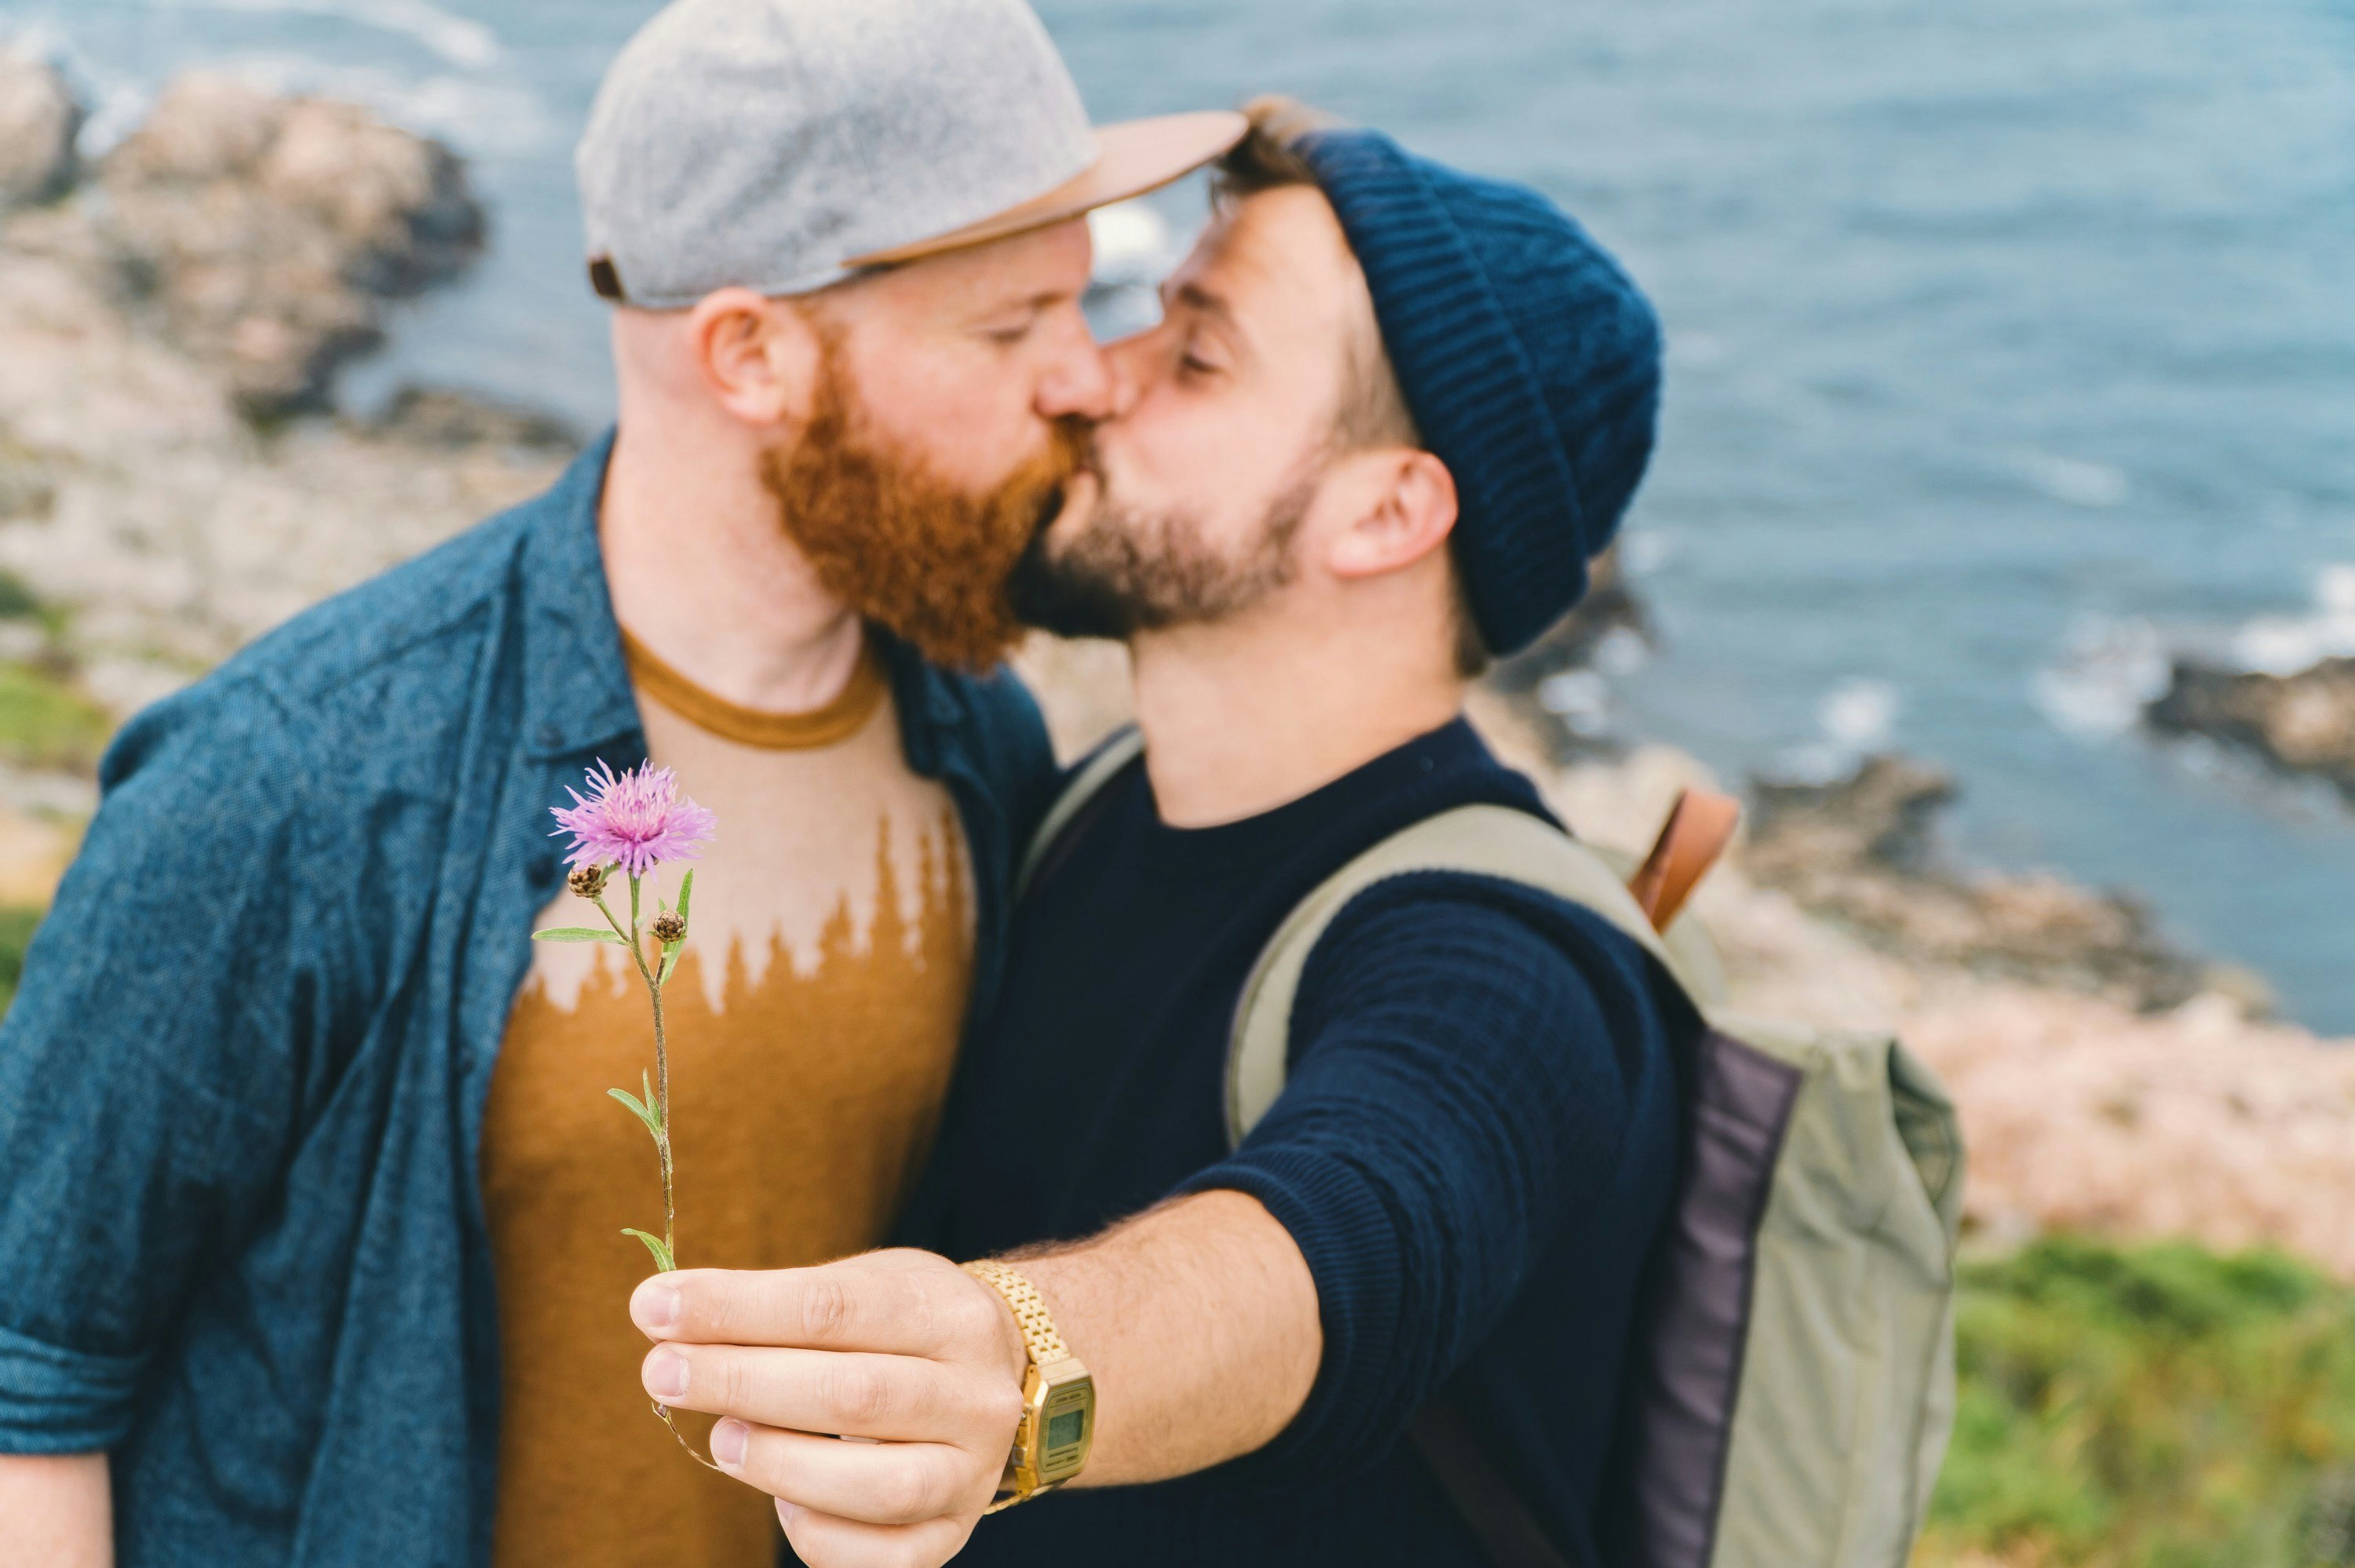 Two white men kissing on a clifftop. They're slightly out of focus, with the camera zoned in on a small purple flower that one man is holding out